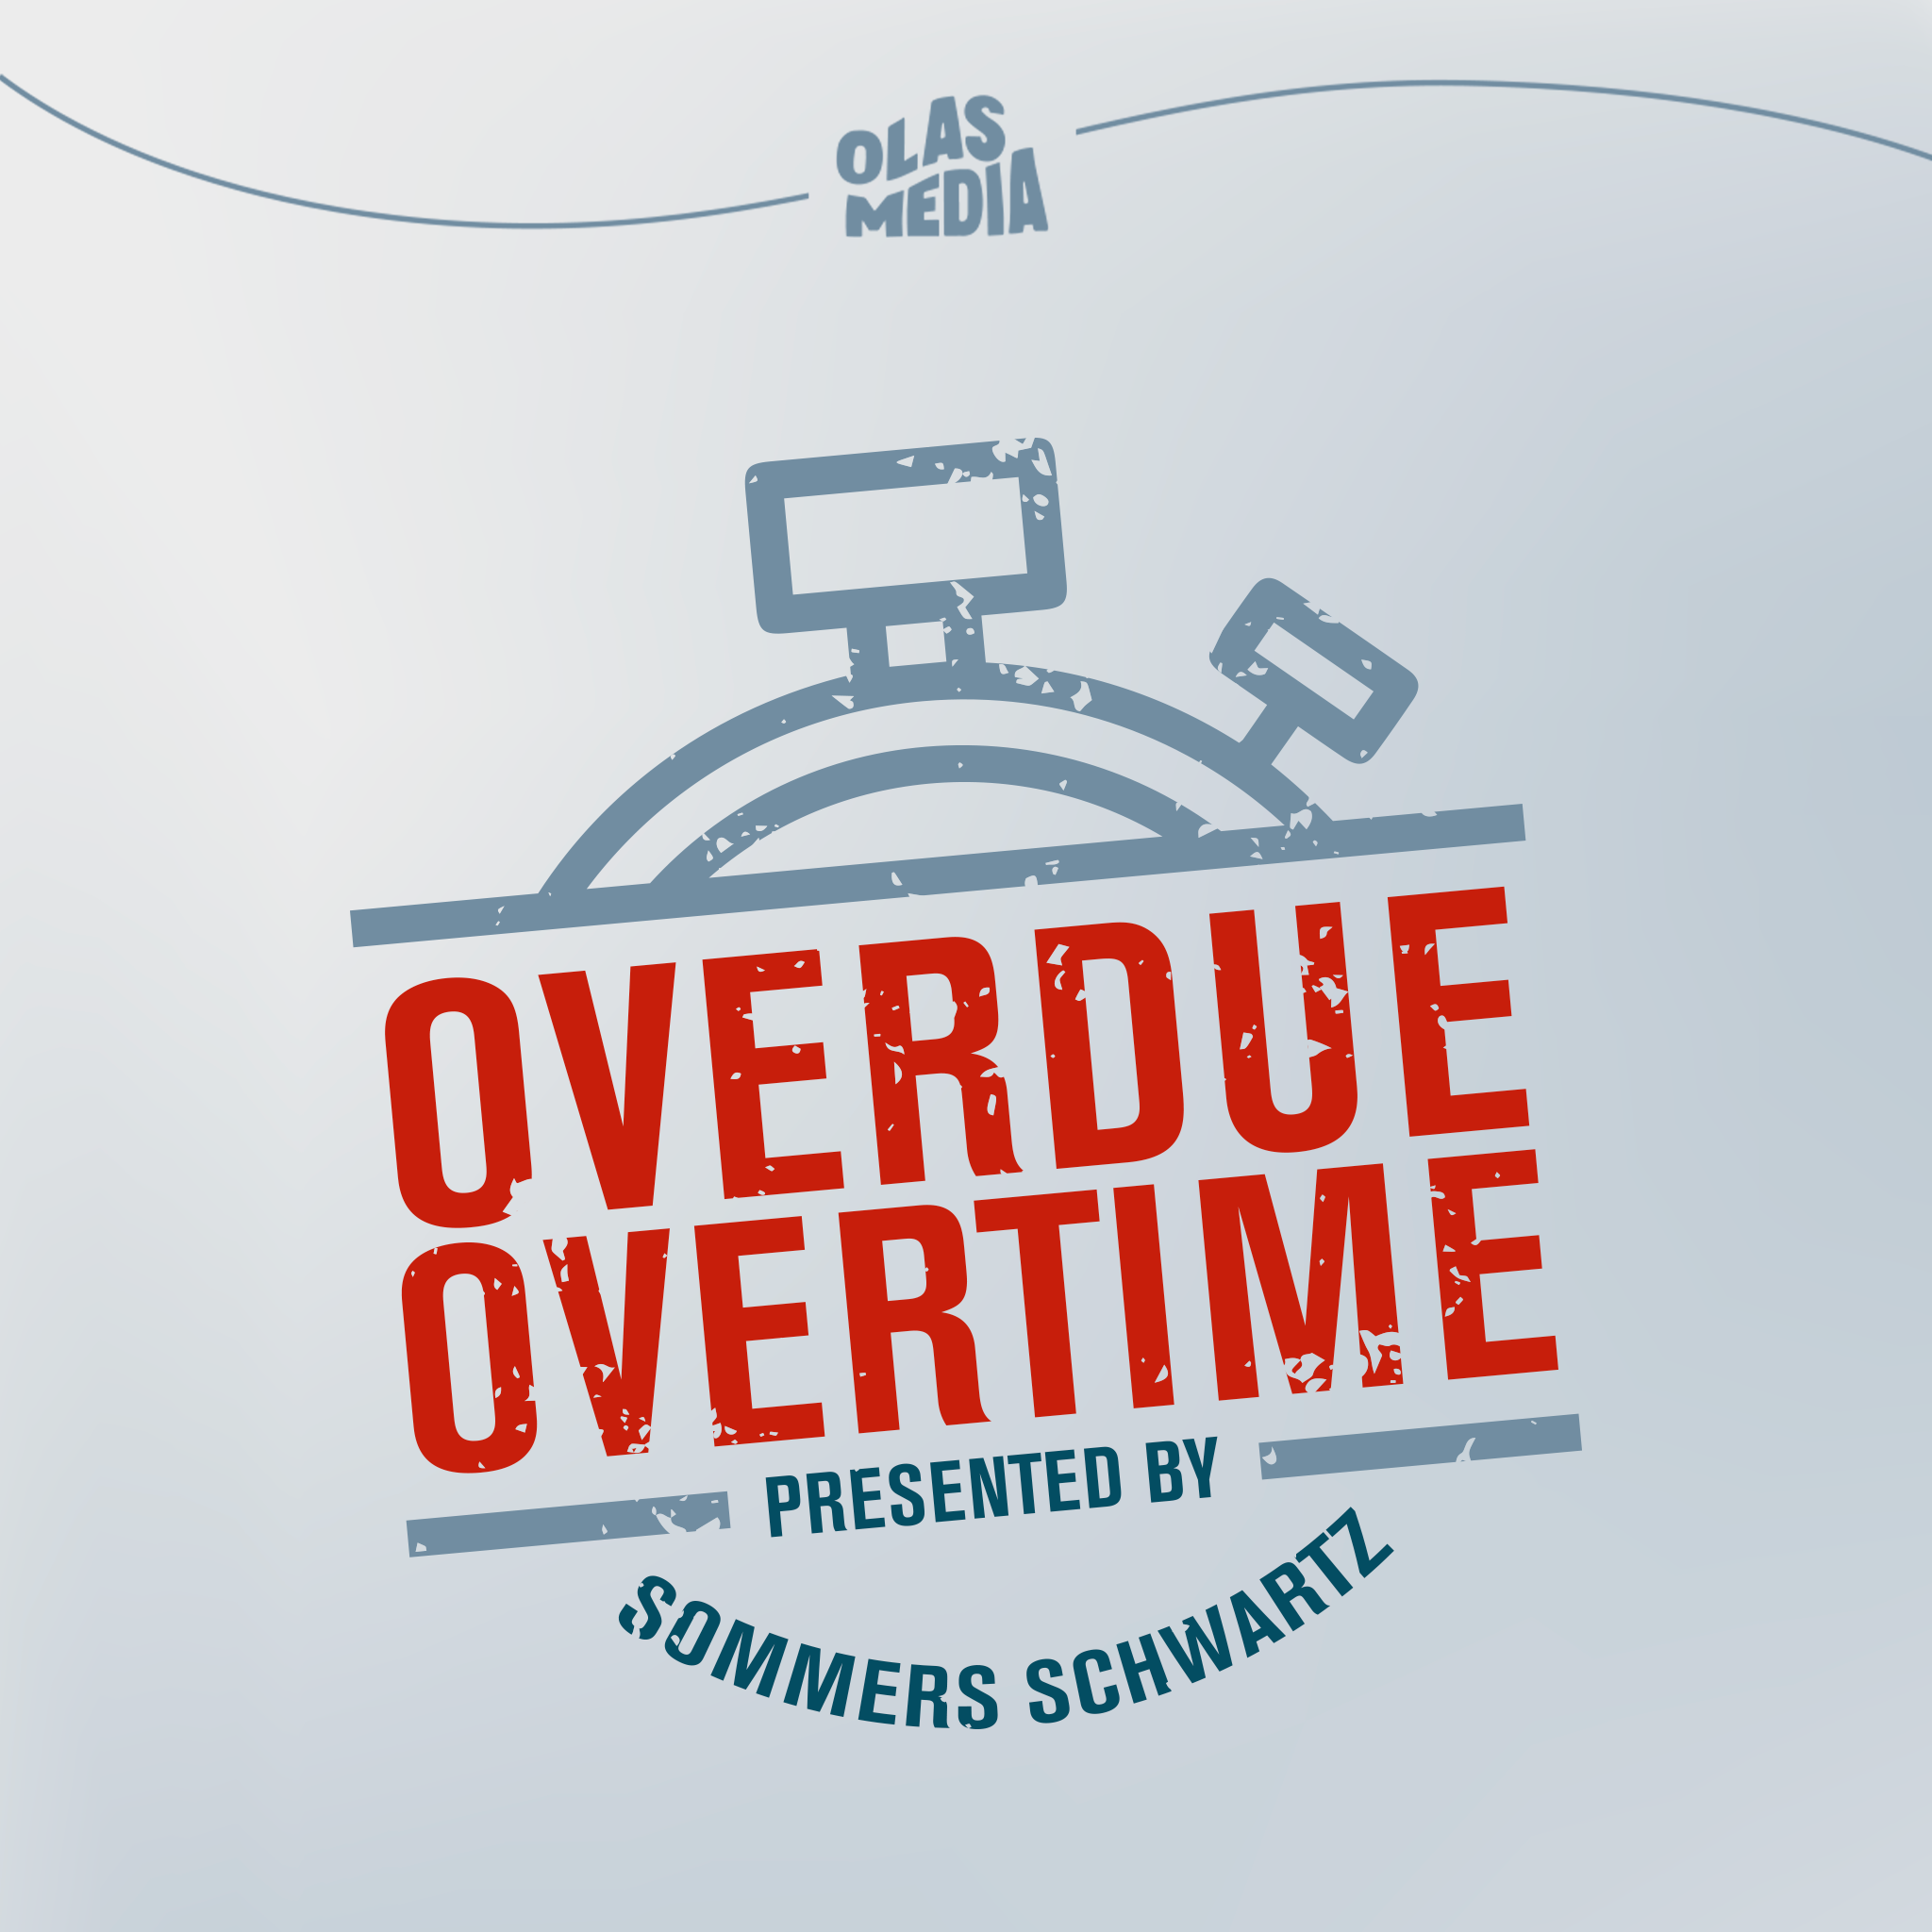 Overdue Overtime Presented by Sommers Schwartz